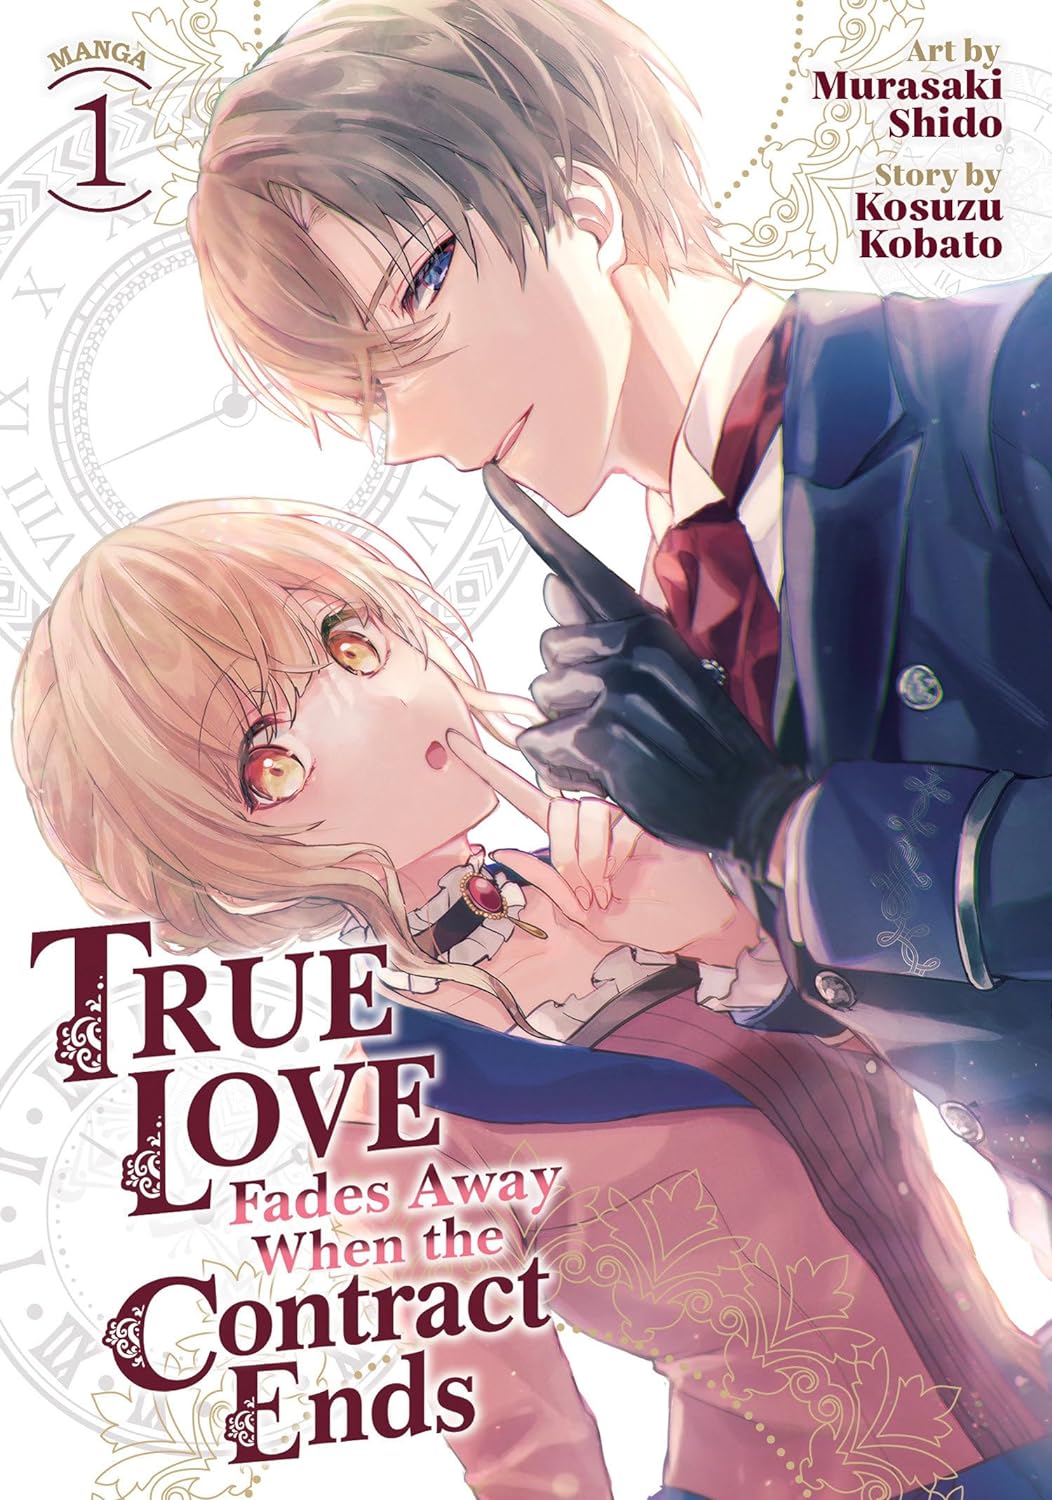 True Love Fades Away When the Contract Ends (Manga) Vol. 01